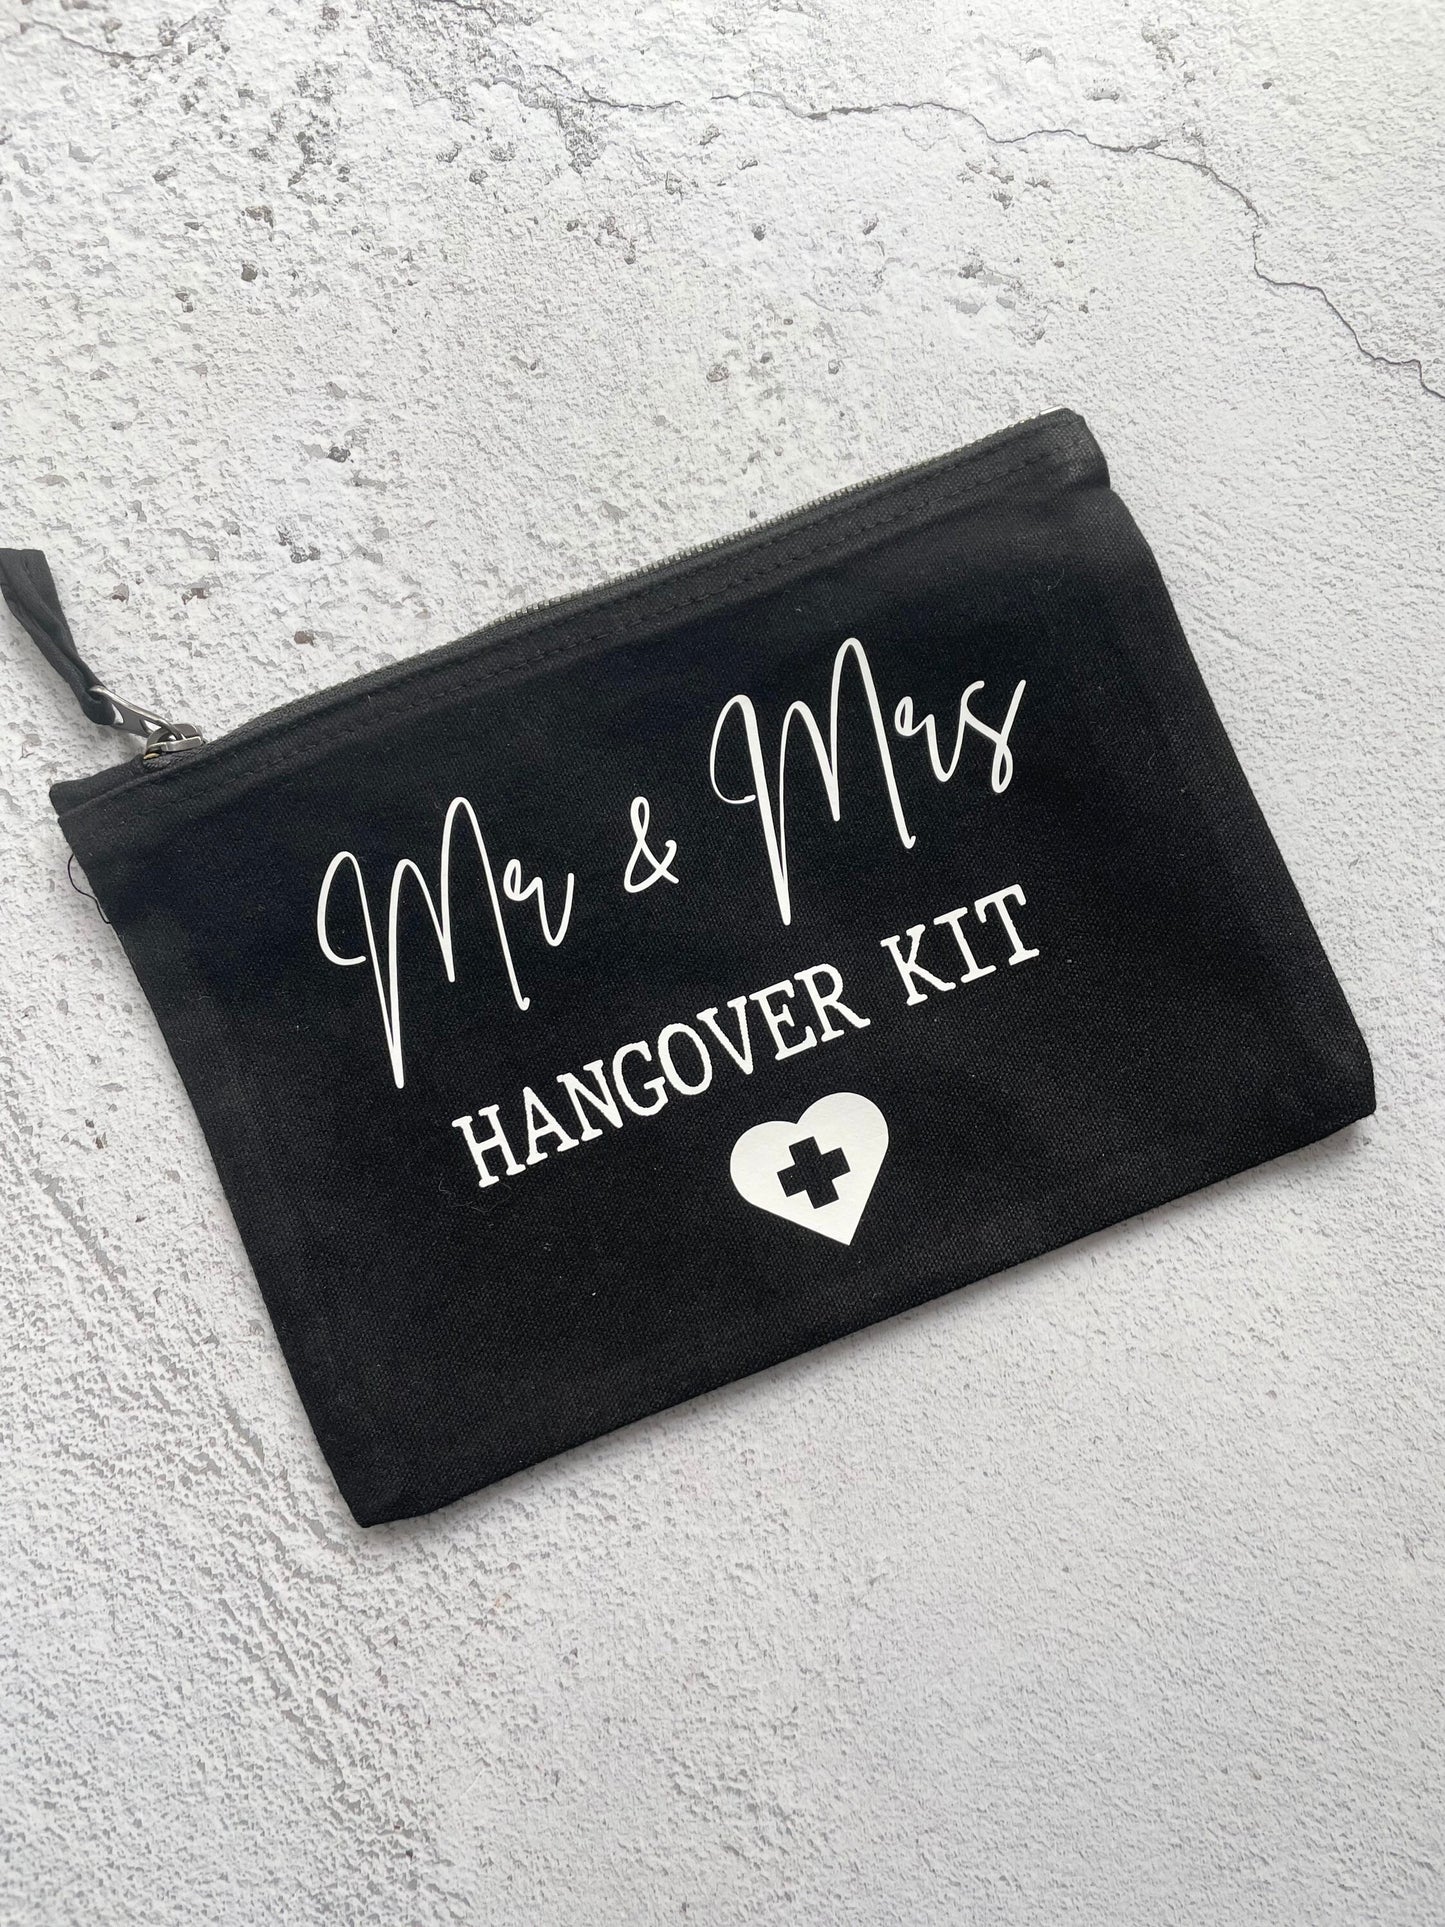 Mr & Mrs Hangover kit, newlyweds hangover pouch, morning after the wedding gift for bride and groom for wedding day hangover